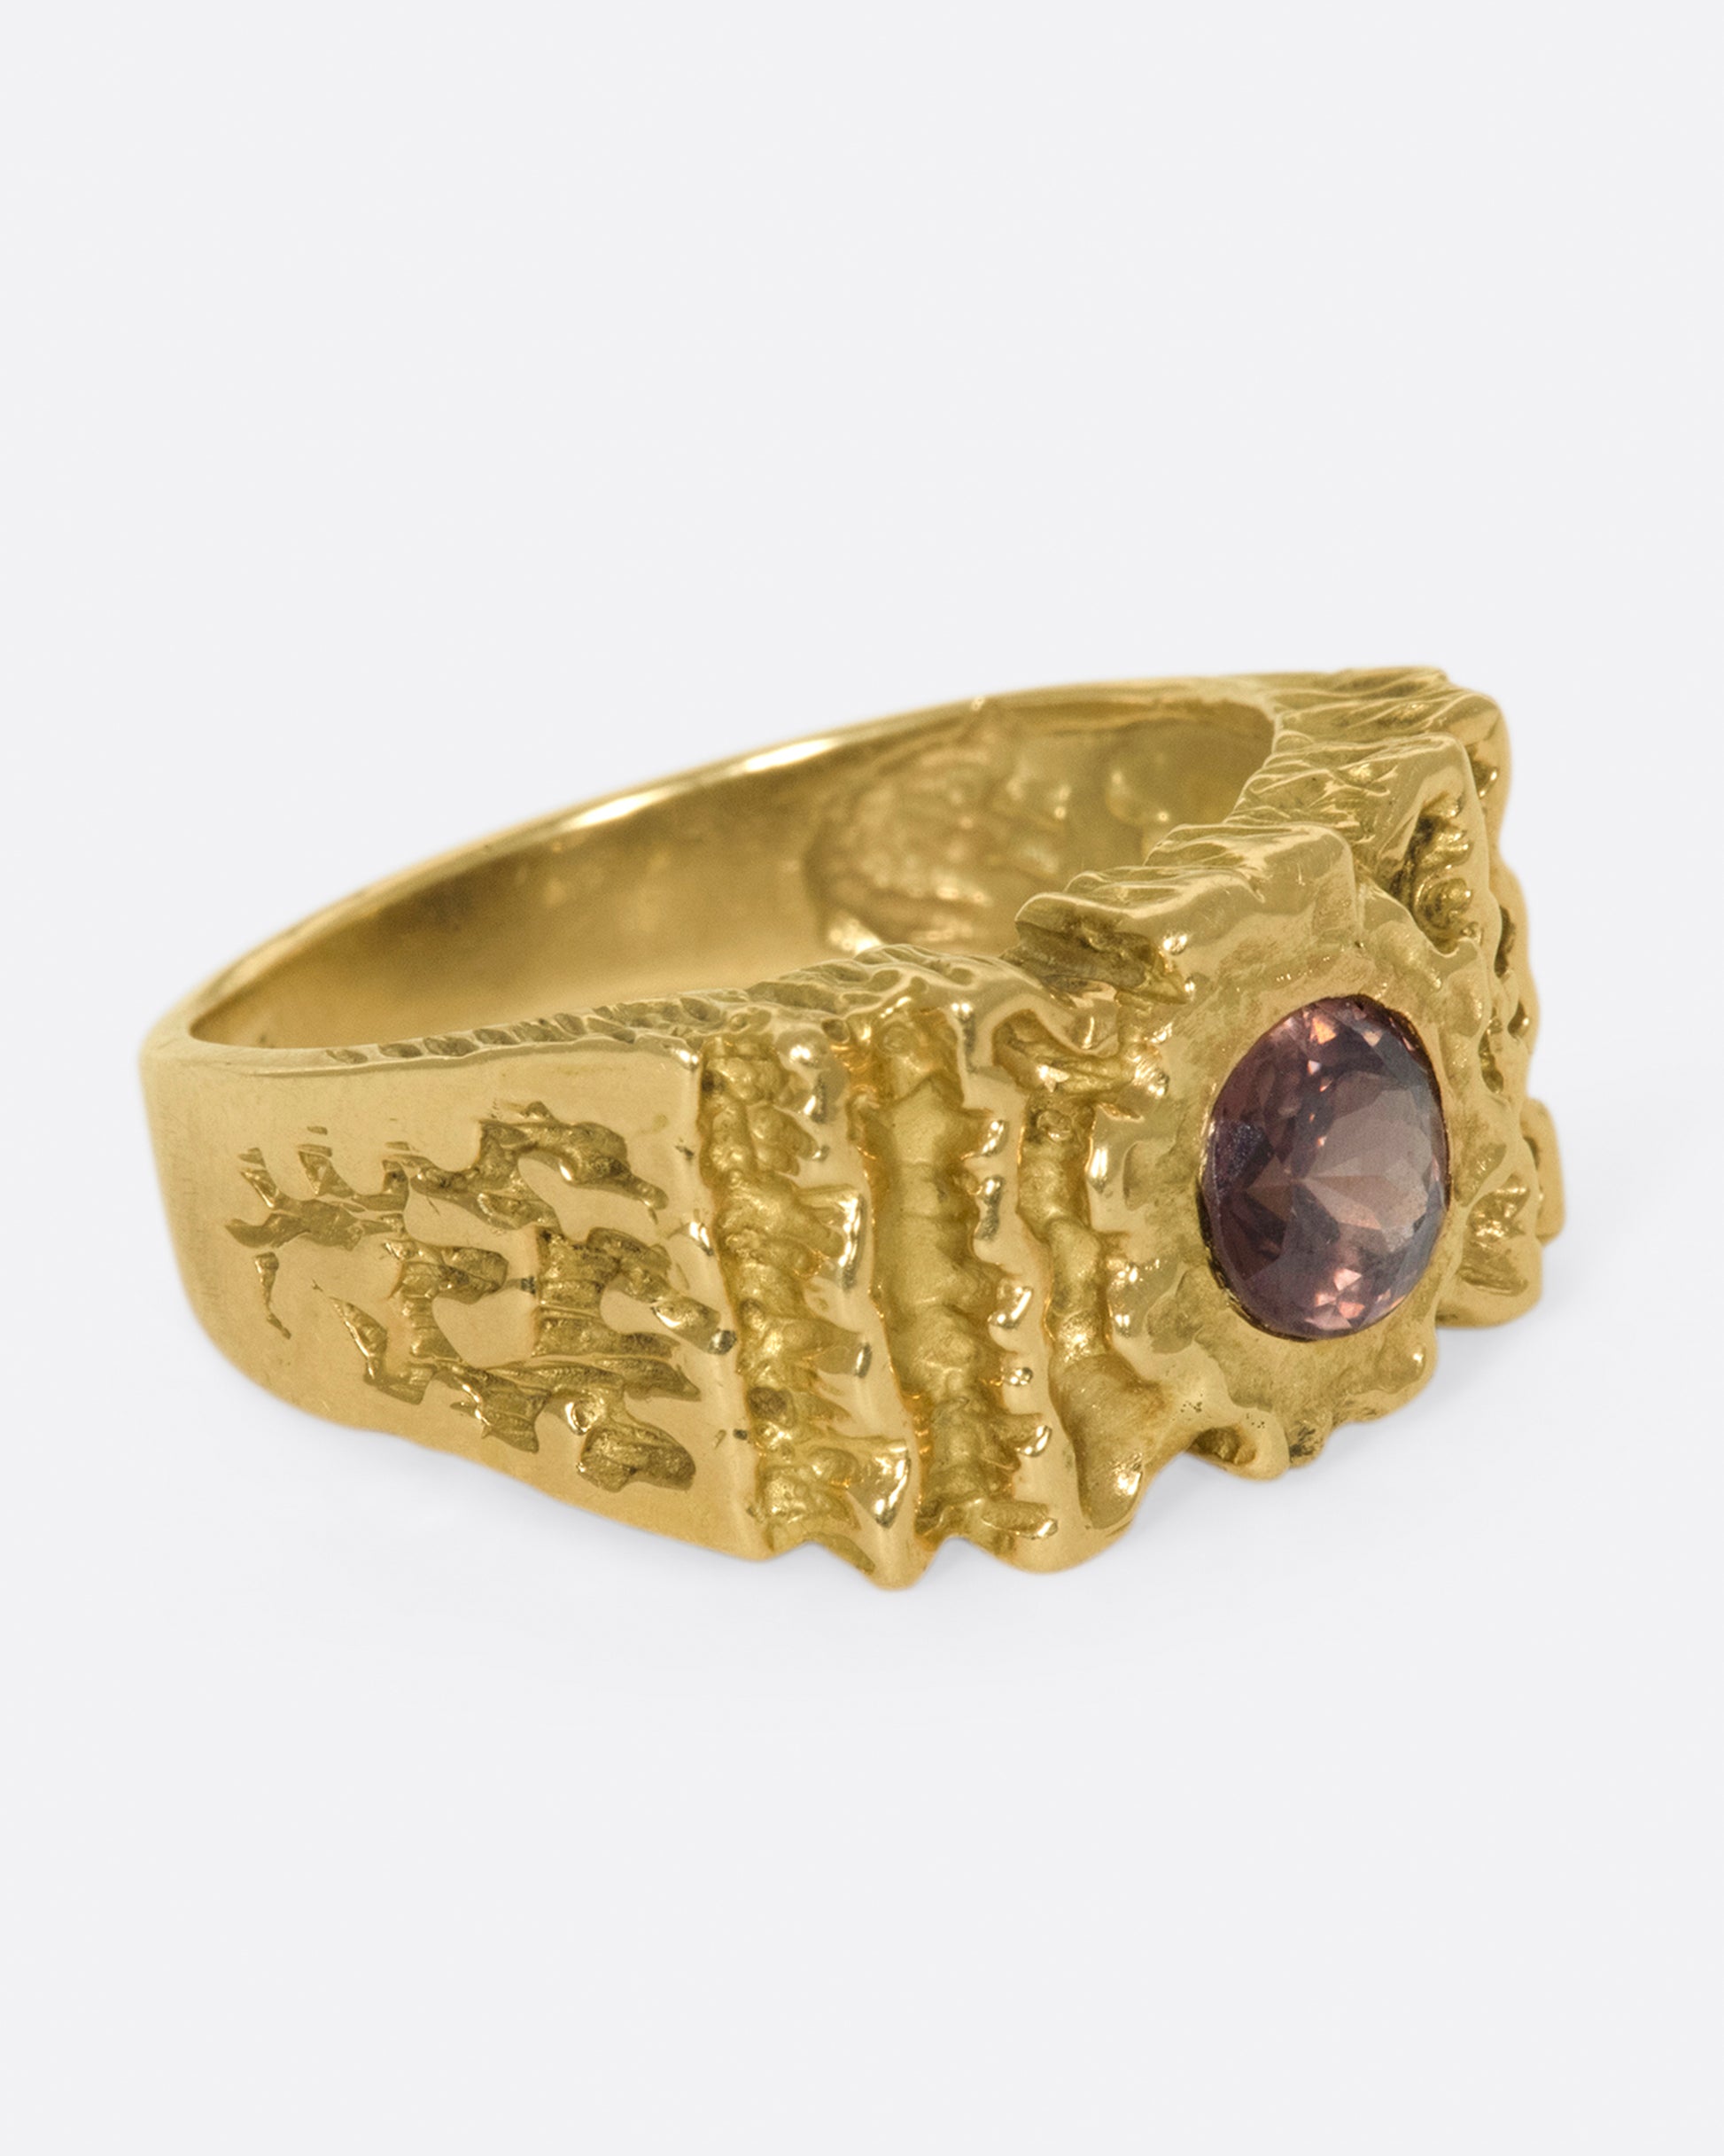 A right side view of a yellow gold ring with ribbon texture and round pink spinel.